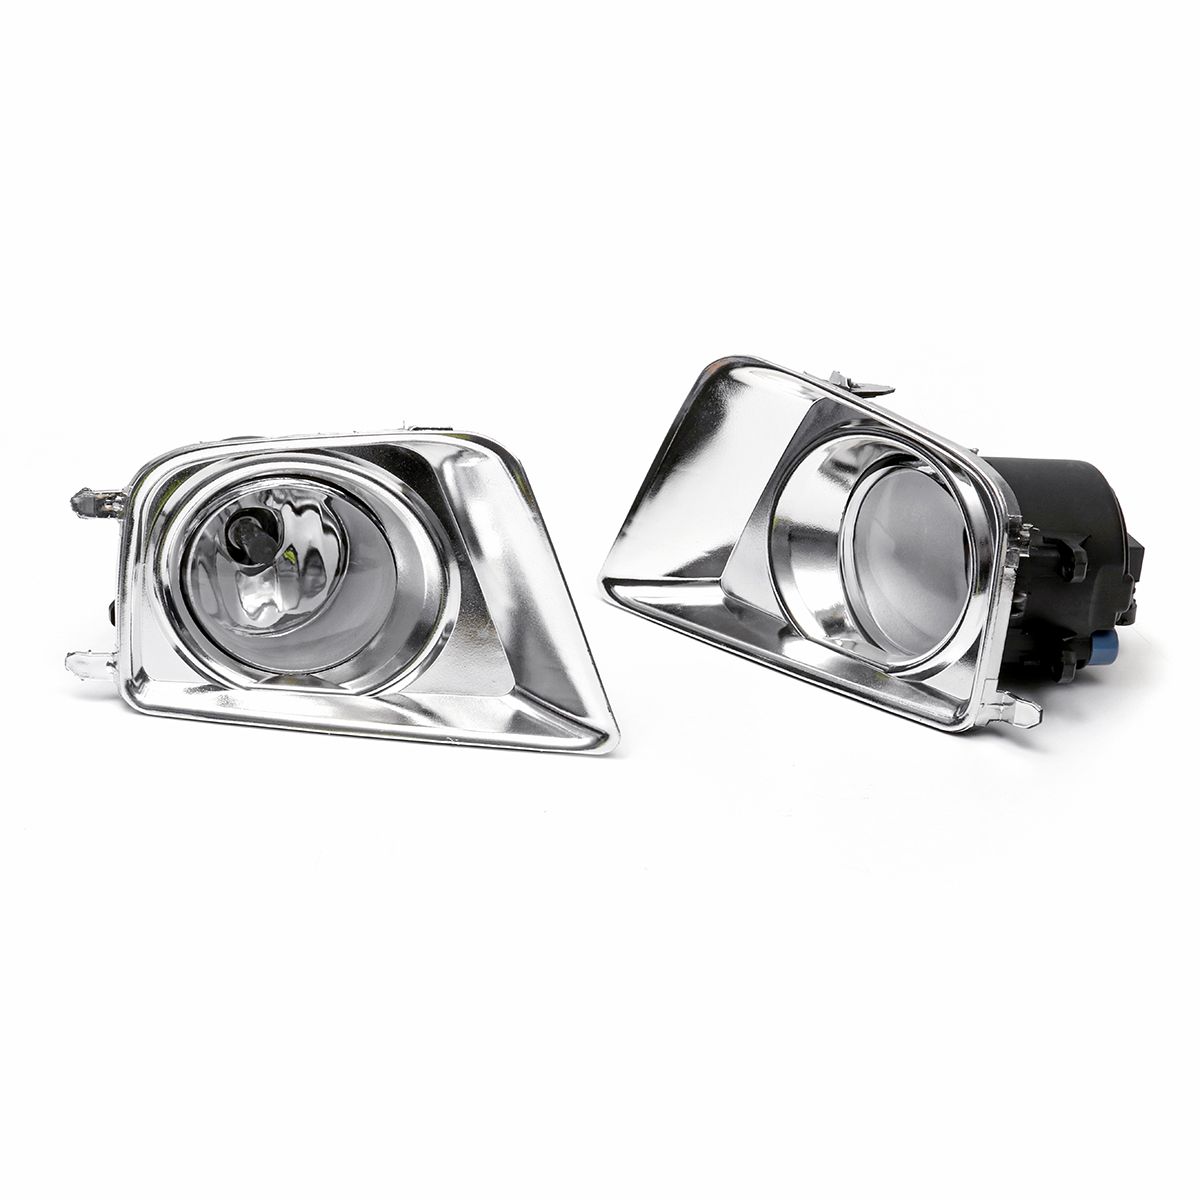 2Pcs-Car-Fog-Light-H11-Bulbs-Chrome-Silver-With-Wire-Harness-Covers-Kit-For-Toyota-Tacoma-2012-2015-1680516